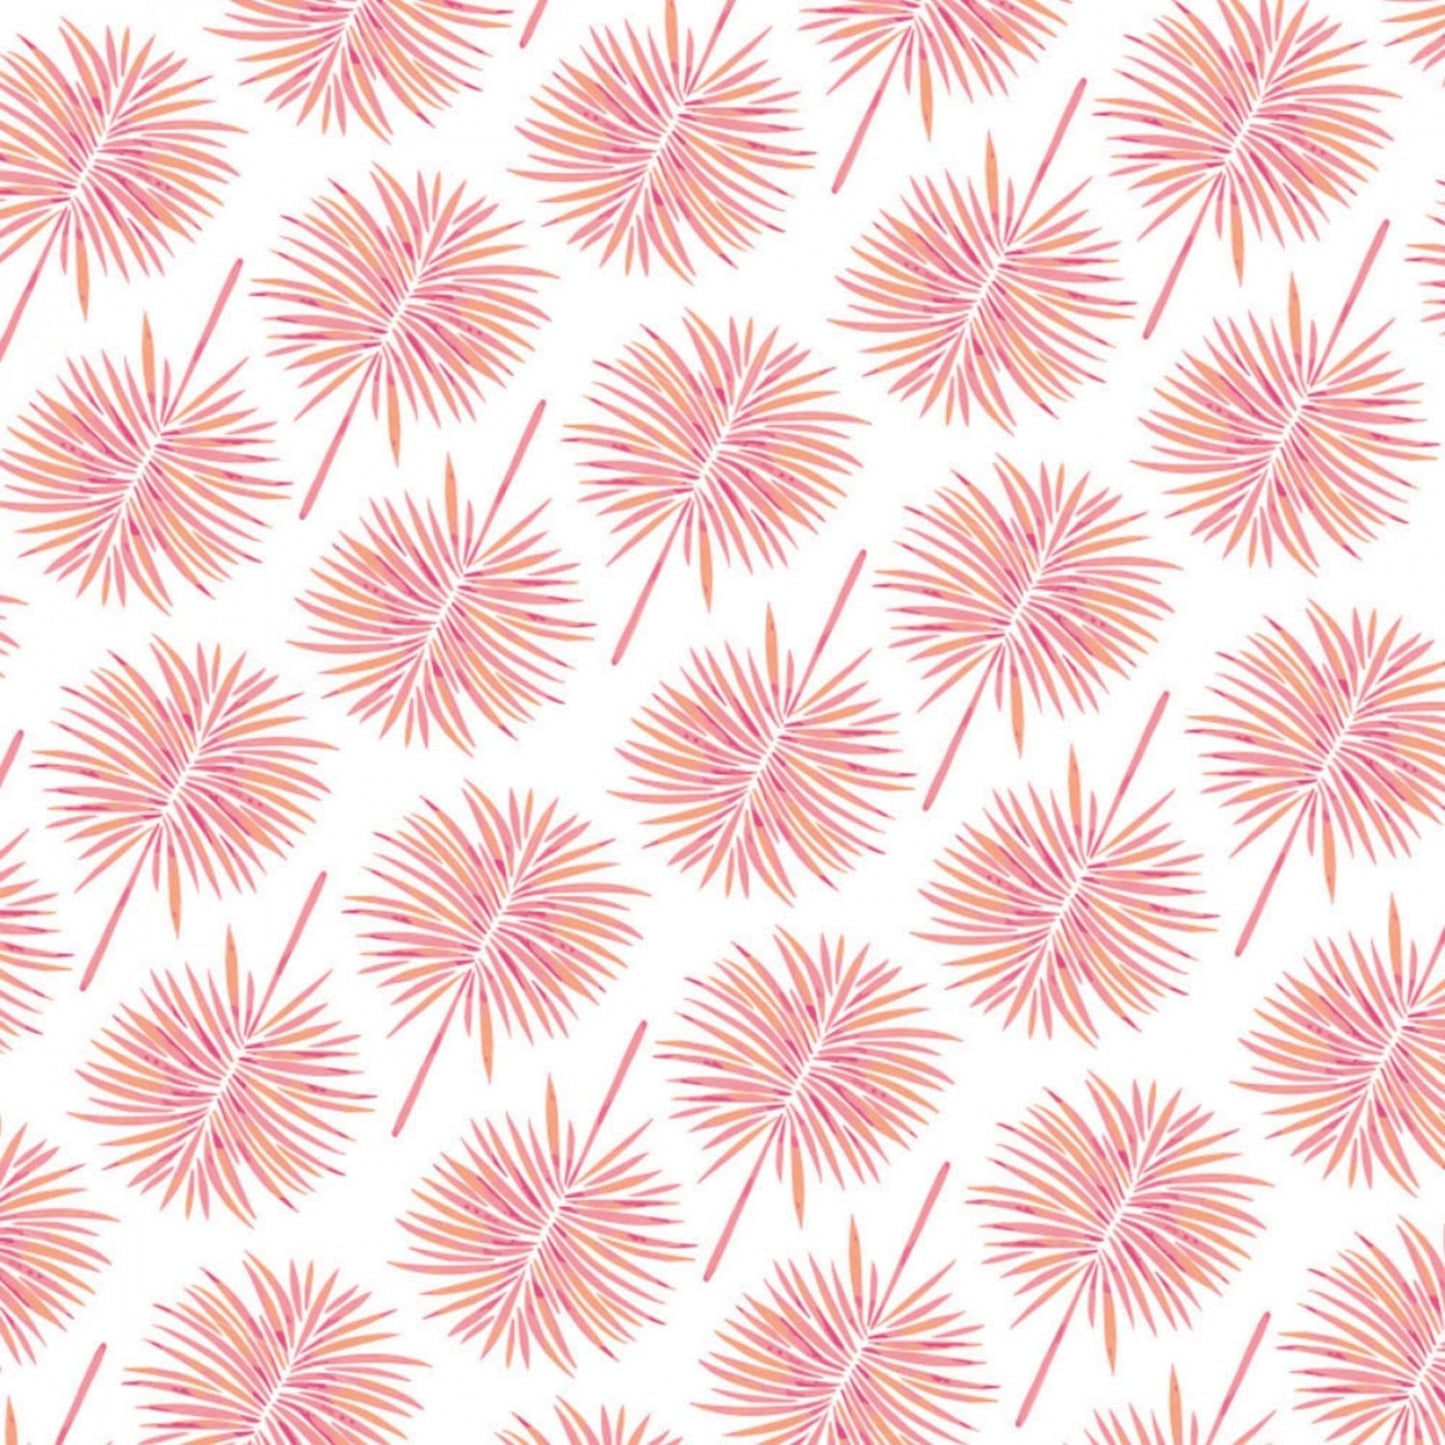 Moroccan Nights by Cat Coquillette Fan Palms Pink 86190207-2 Digitally Printed Cotton Woven Fabric